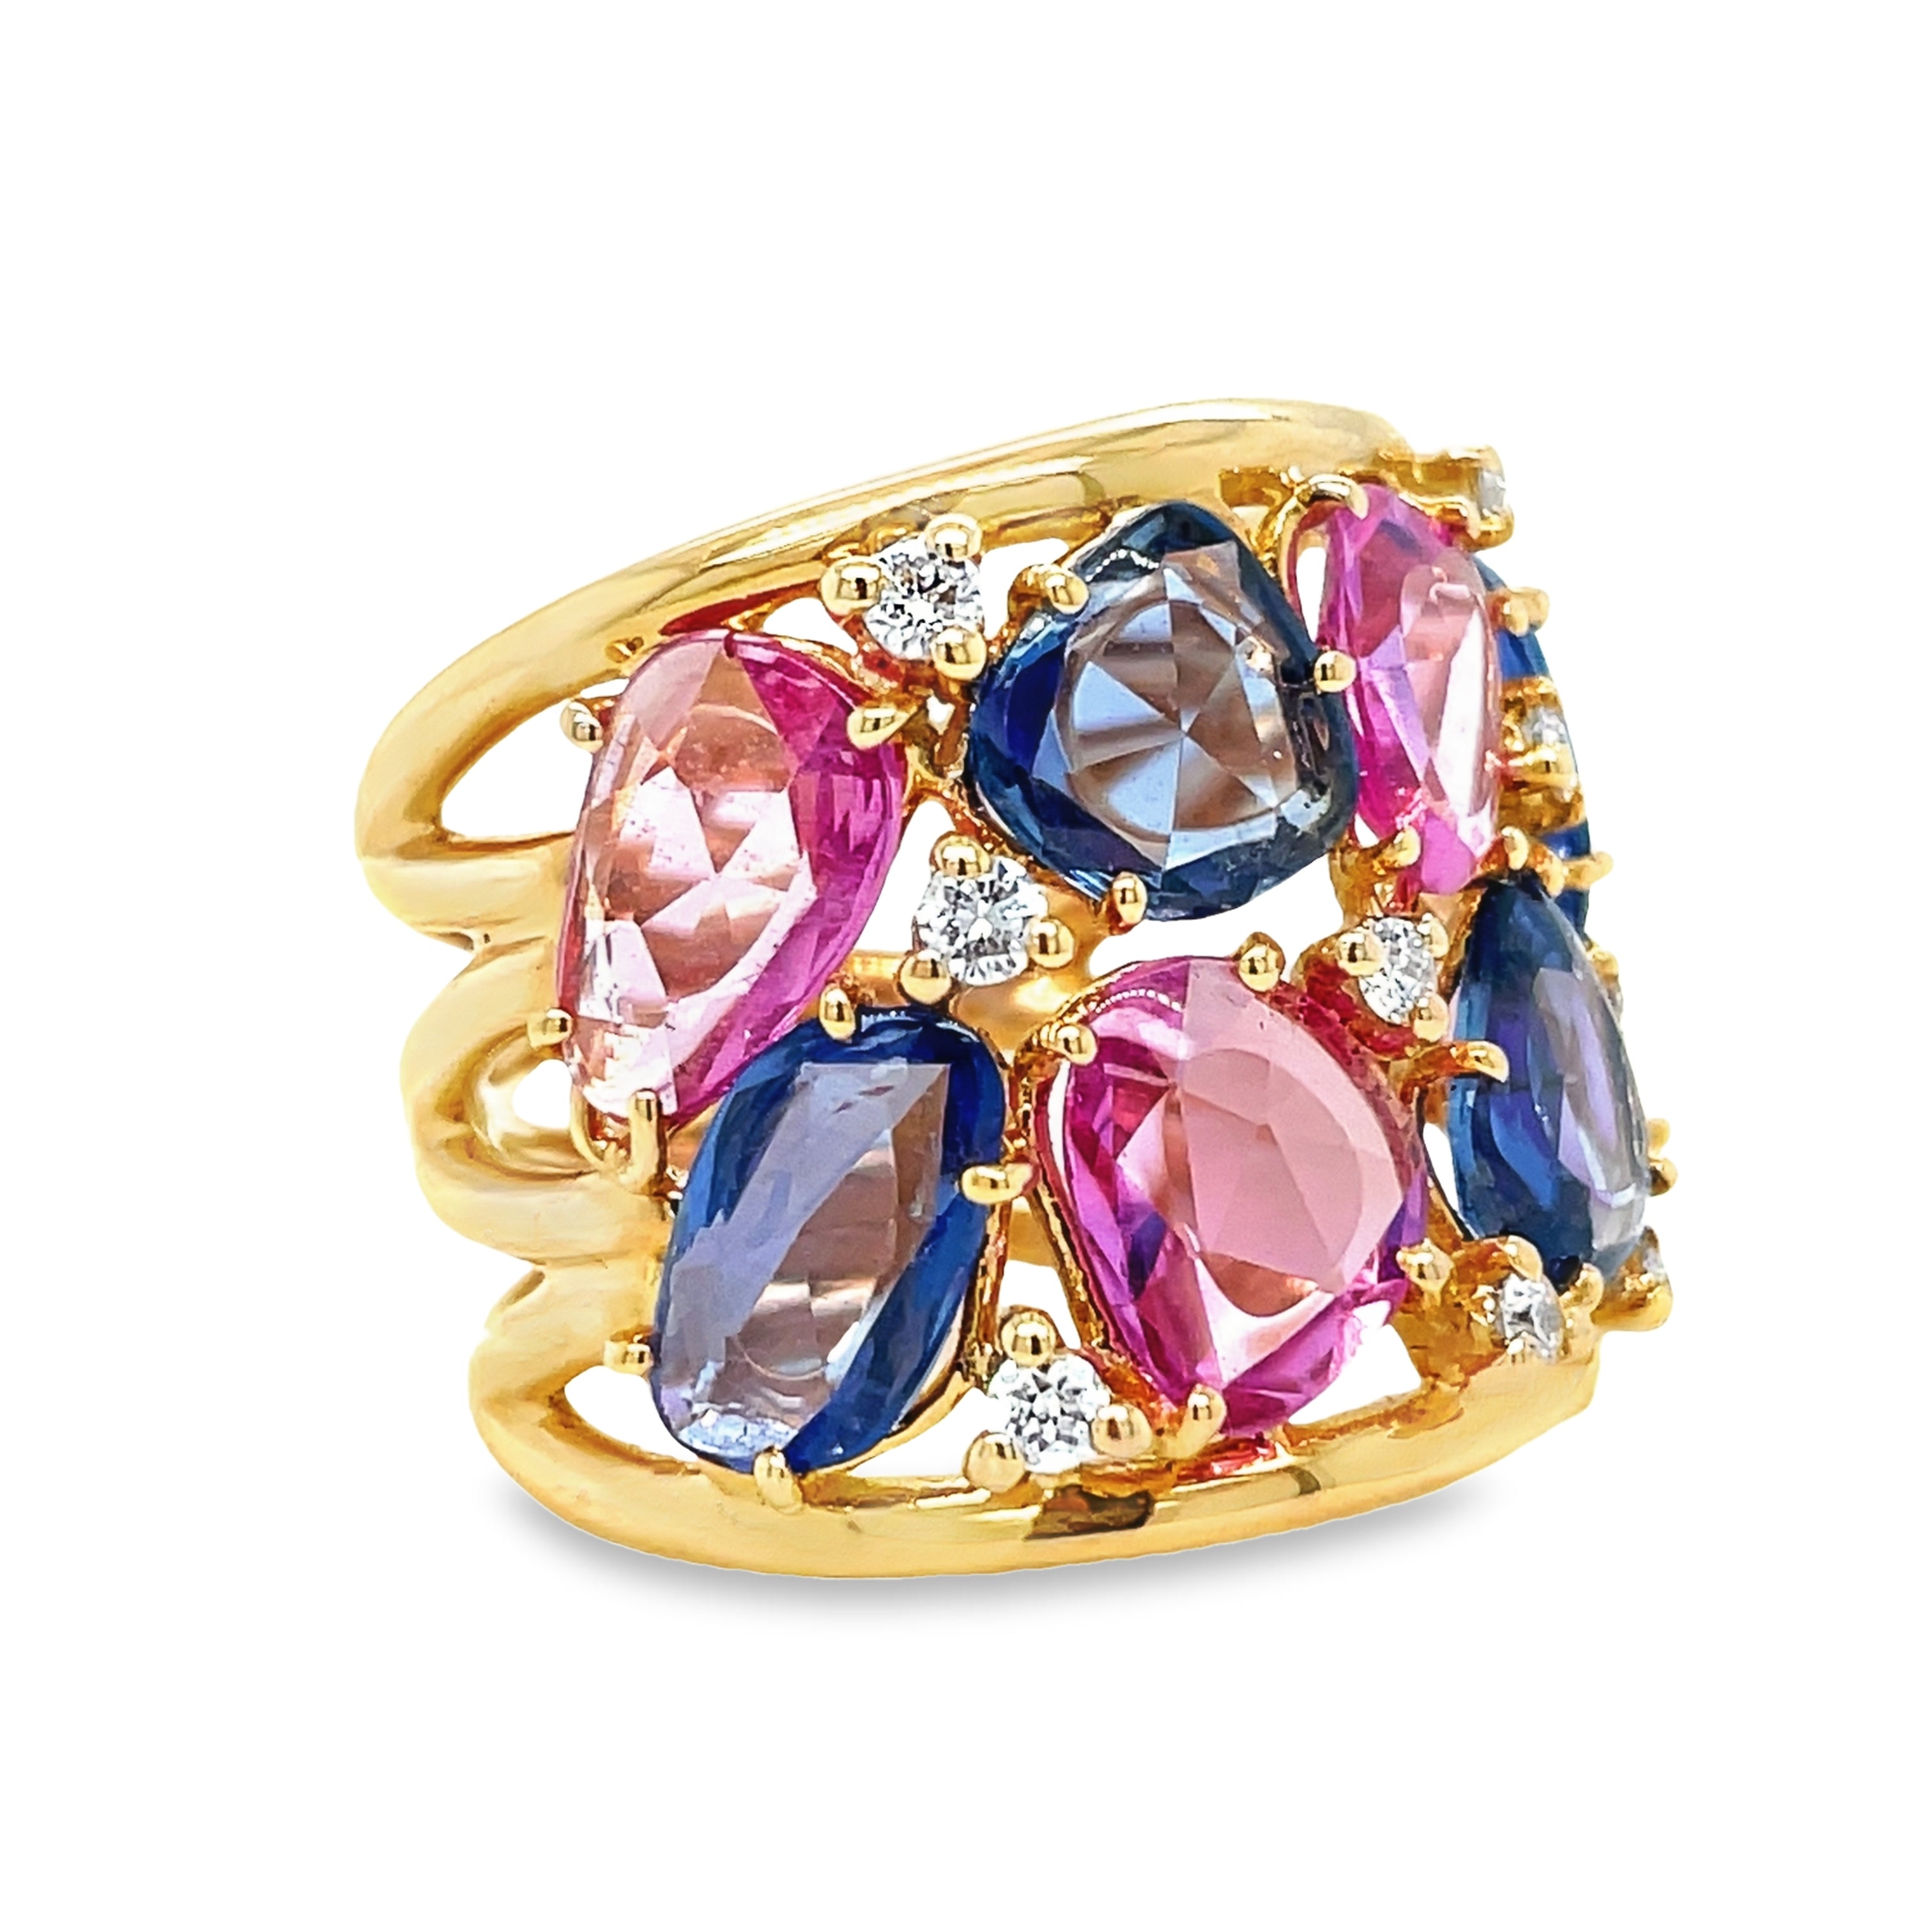 This exquisite 18k yellow gold ring boasts an array of multicolor pink and blue sapphires 8.14 cts in various sizes and shades, set off by accenting diamonds 0.27 cts for a truly luxurious look. Perfect for formal occasions or as an everyday accessory of luxury.